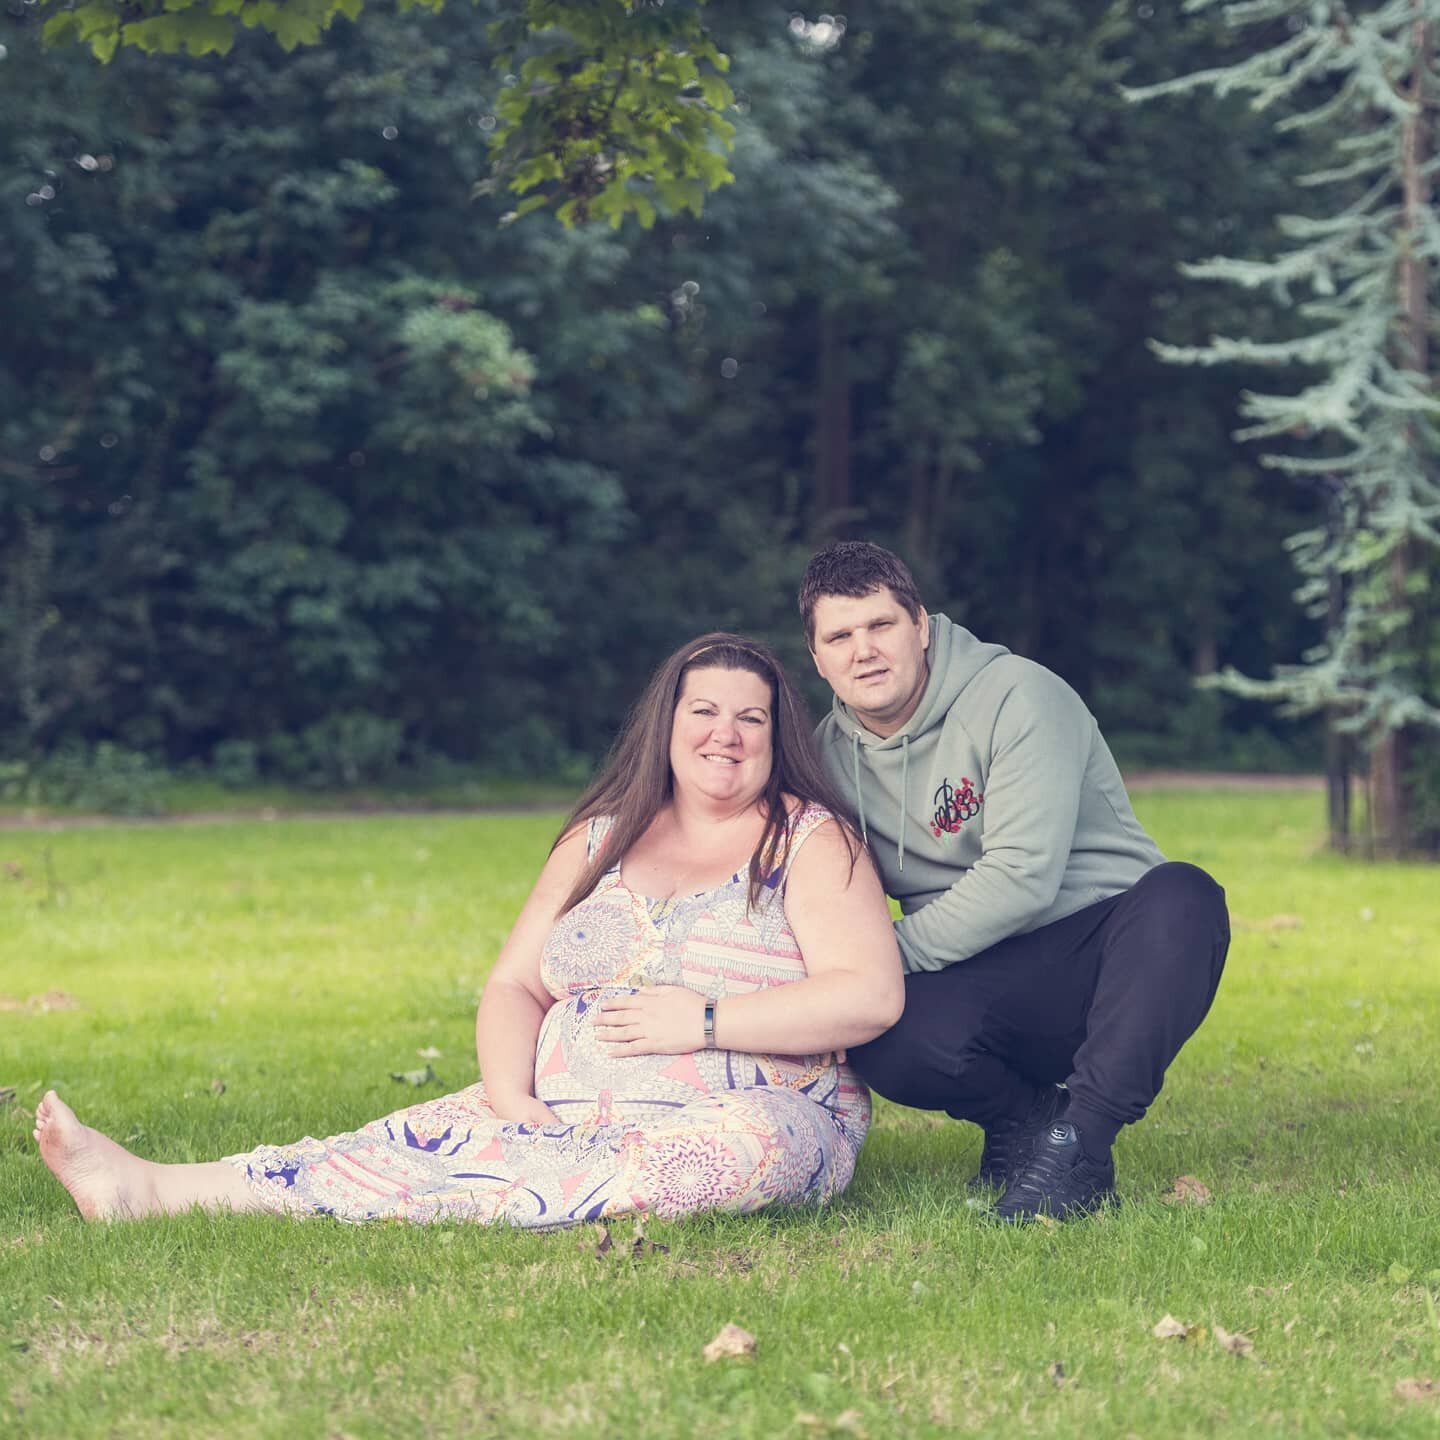 Not long to go!!! Nikki &amp; Leon's little baby will be here very soon so had a lovely shoot in the park before 2 becomes 3!!
.
.
#bumpphotoshoot #maternityshoot #portraitphotography #babybump #babyphotos #bedalephotographer #bedalebusiness #locatio